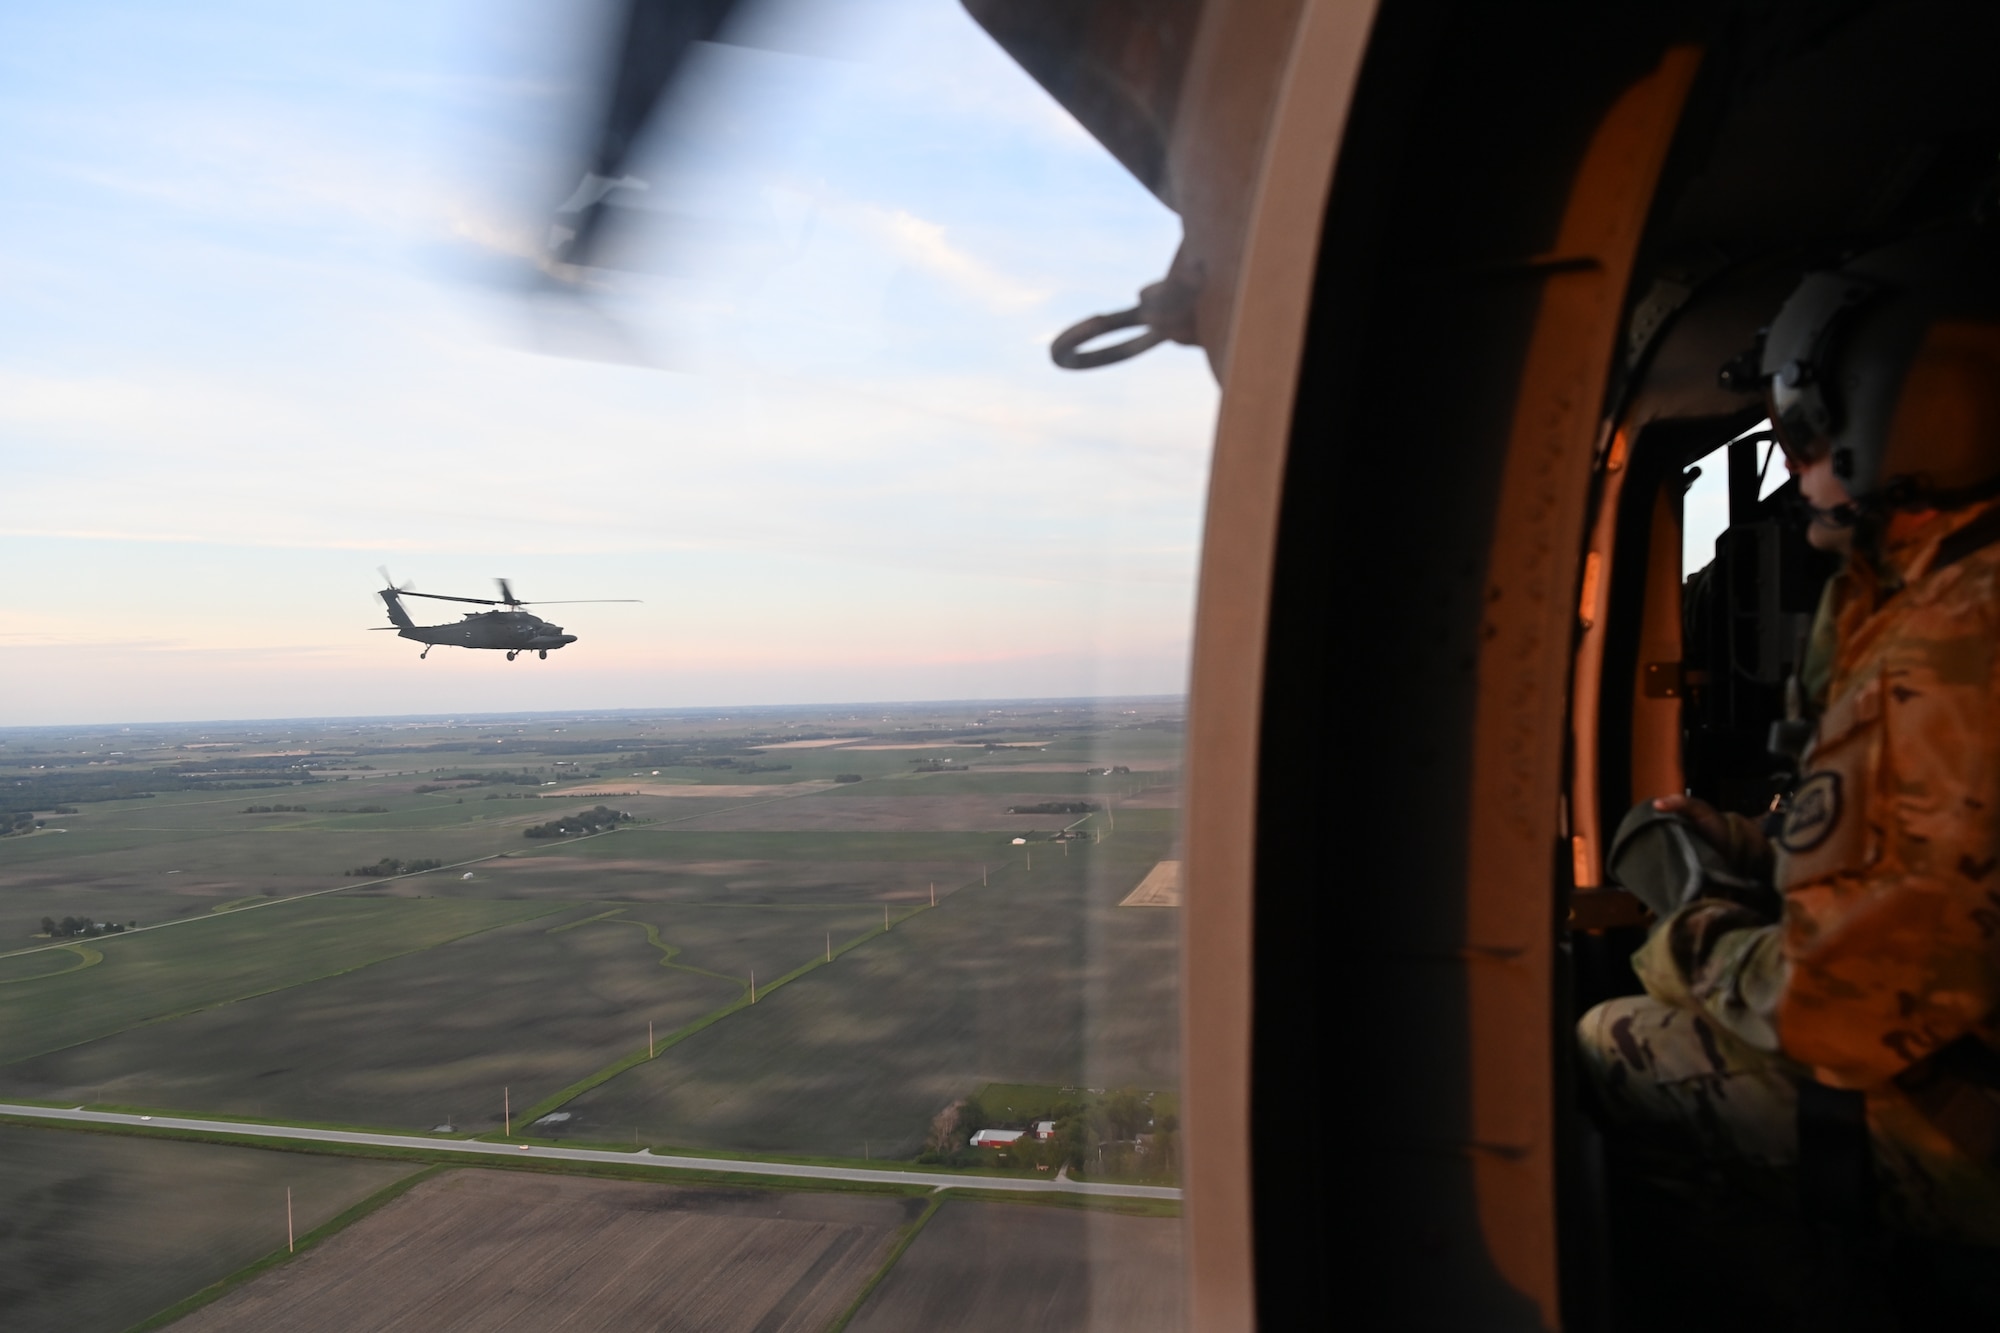 Airmen from the 132d Wing Operations Support Squadron participated in a joint exercise with soldiers from C Co 2-147th Air Assault Helicopter Battalion in Boone, Iowa, June 10, 2022. Intelligence Operations Specialists from the 132d Wing gathered and shared intel to support the various mission sets. (Iowa Air National Guard photo by Senior Airman Victoria J. Hanson)